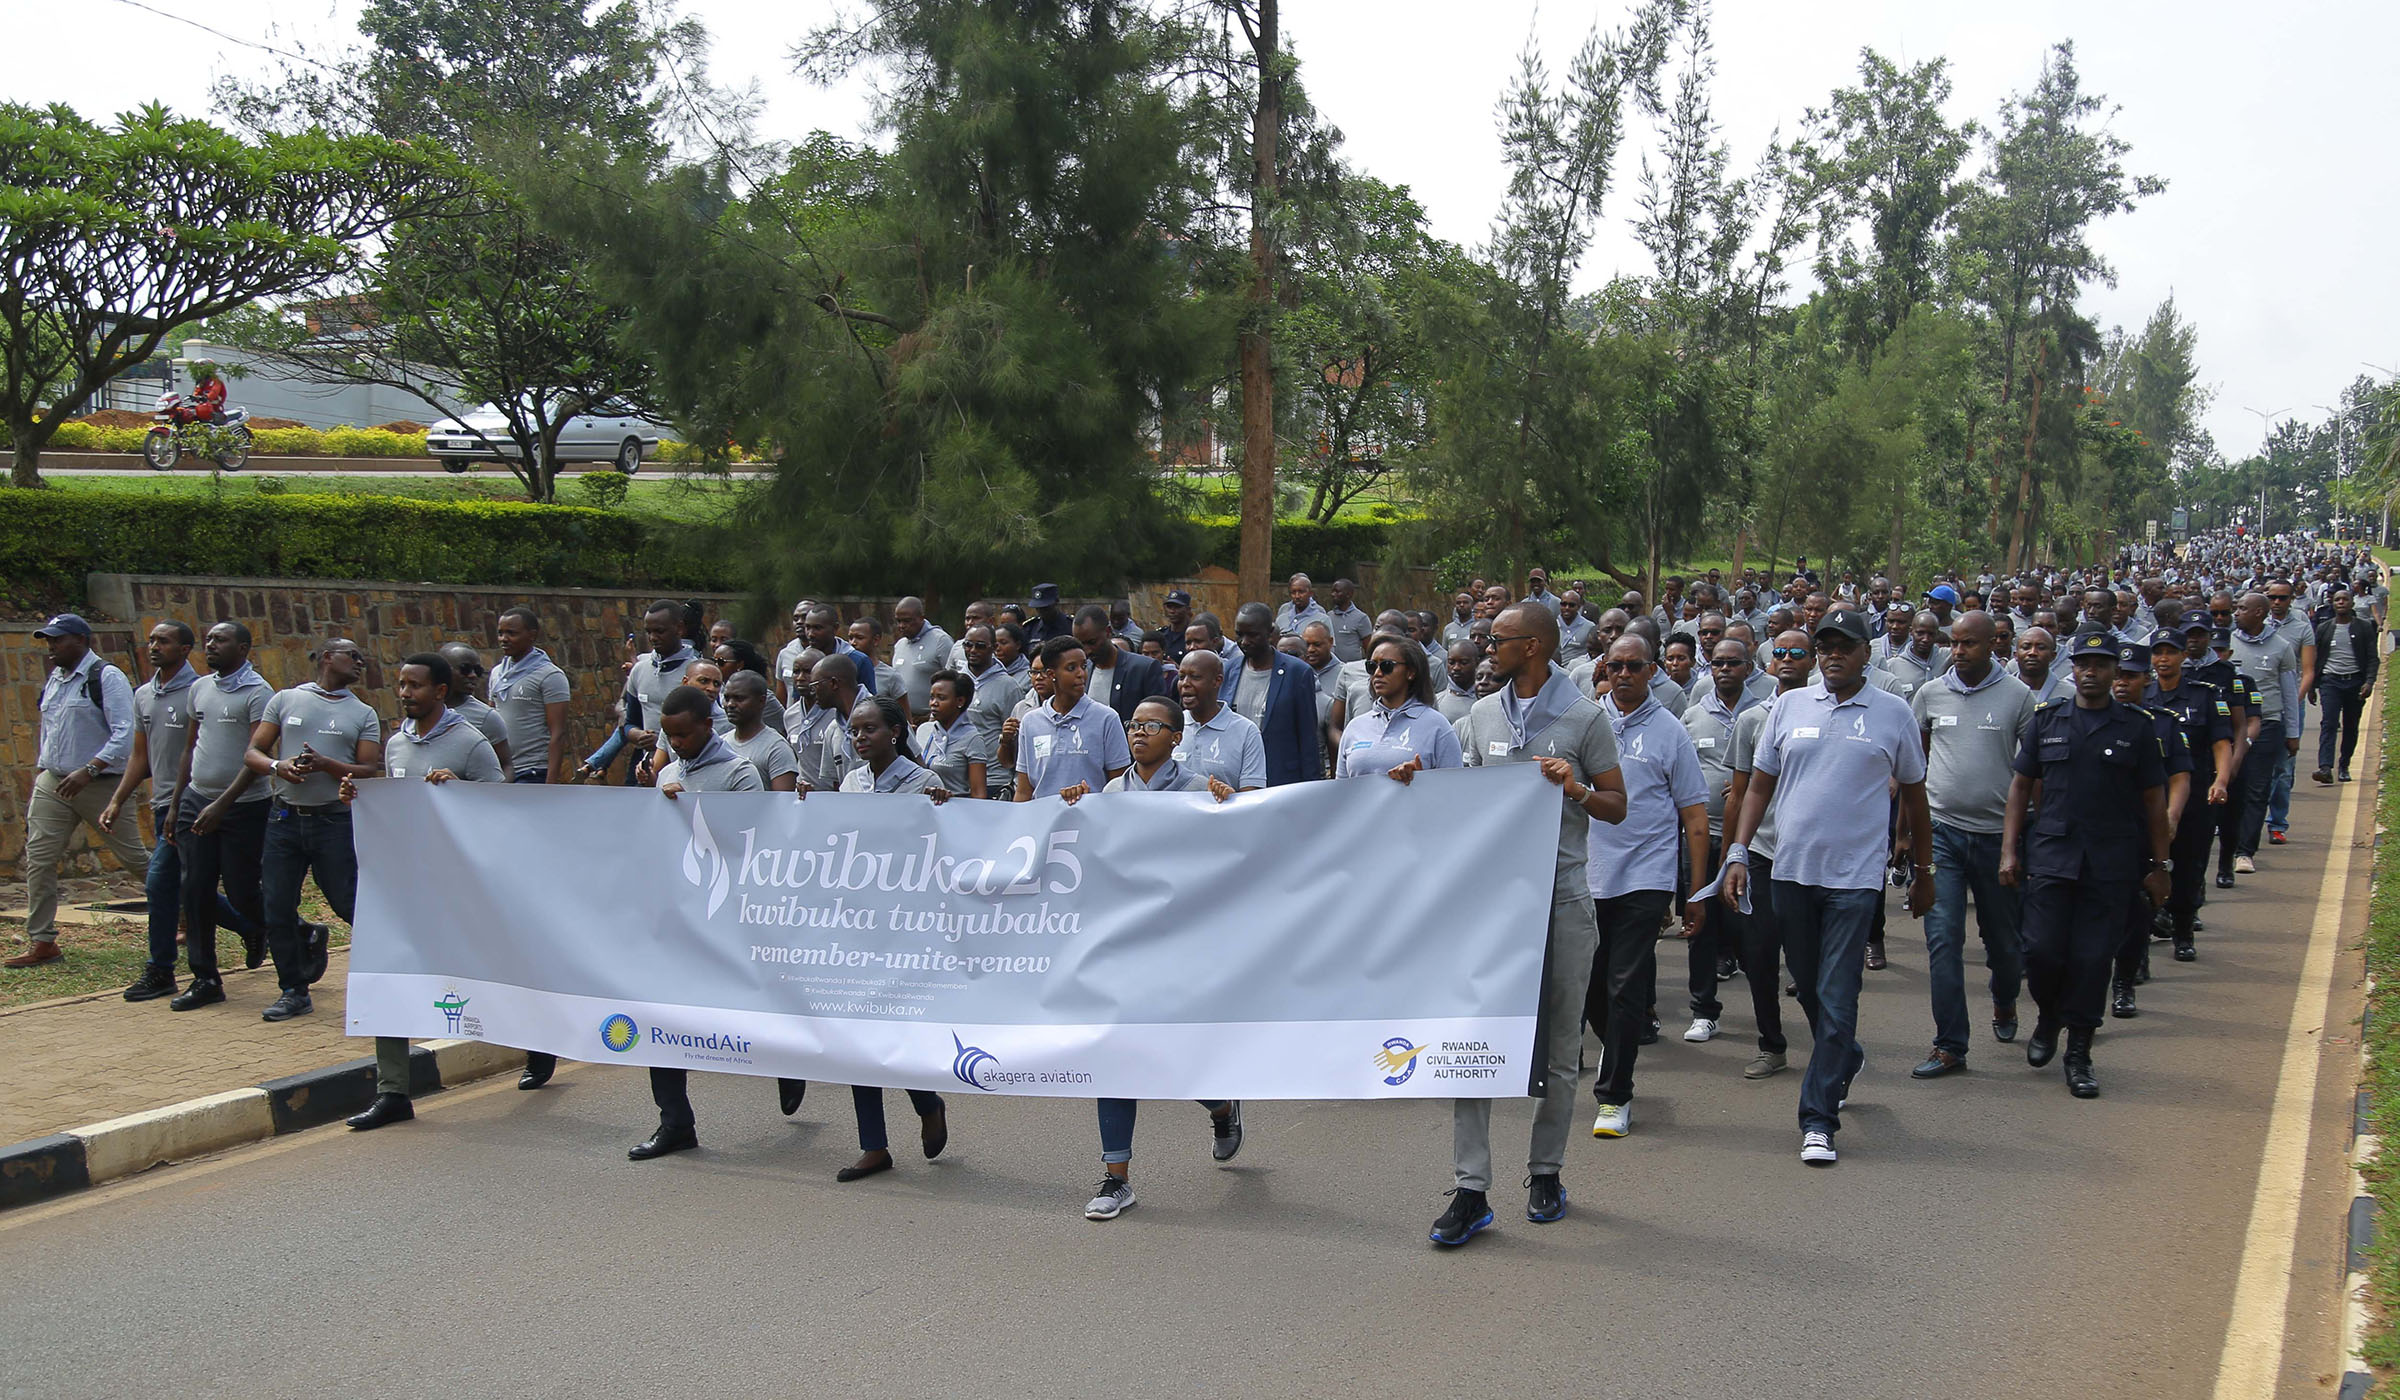 Members of the aviation community in a Walk to Remember, from Amahoro Stadium to Parliamentary Buildings, on April 10, 2019. A host of private and public organisations yesterday joined Rwandans to commemorate the victims of the 1994 Genocide against the Tutsi. Sam Ngendahimana.